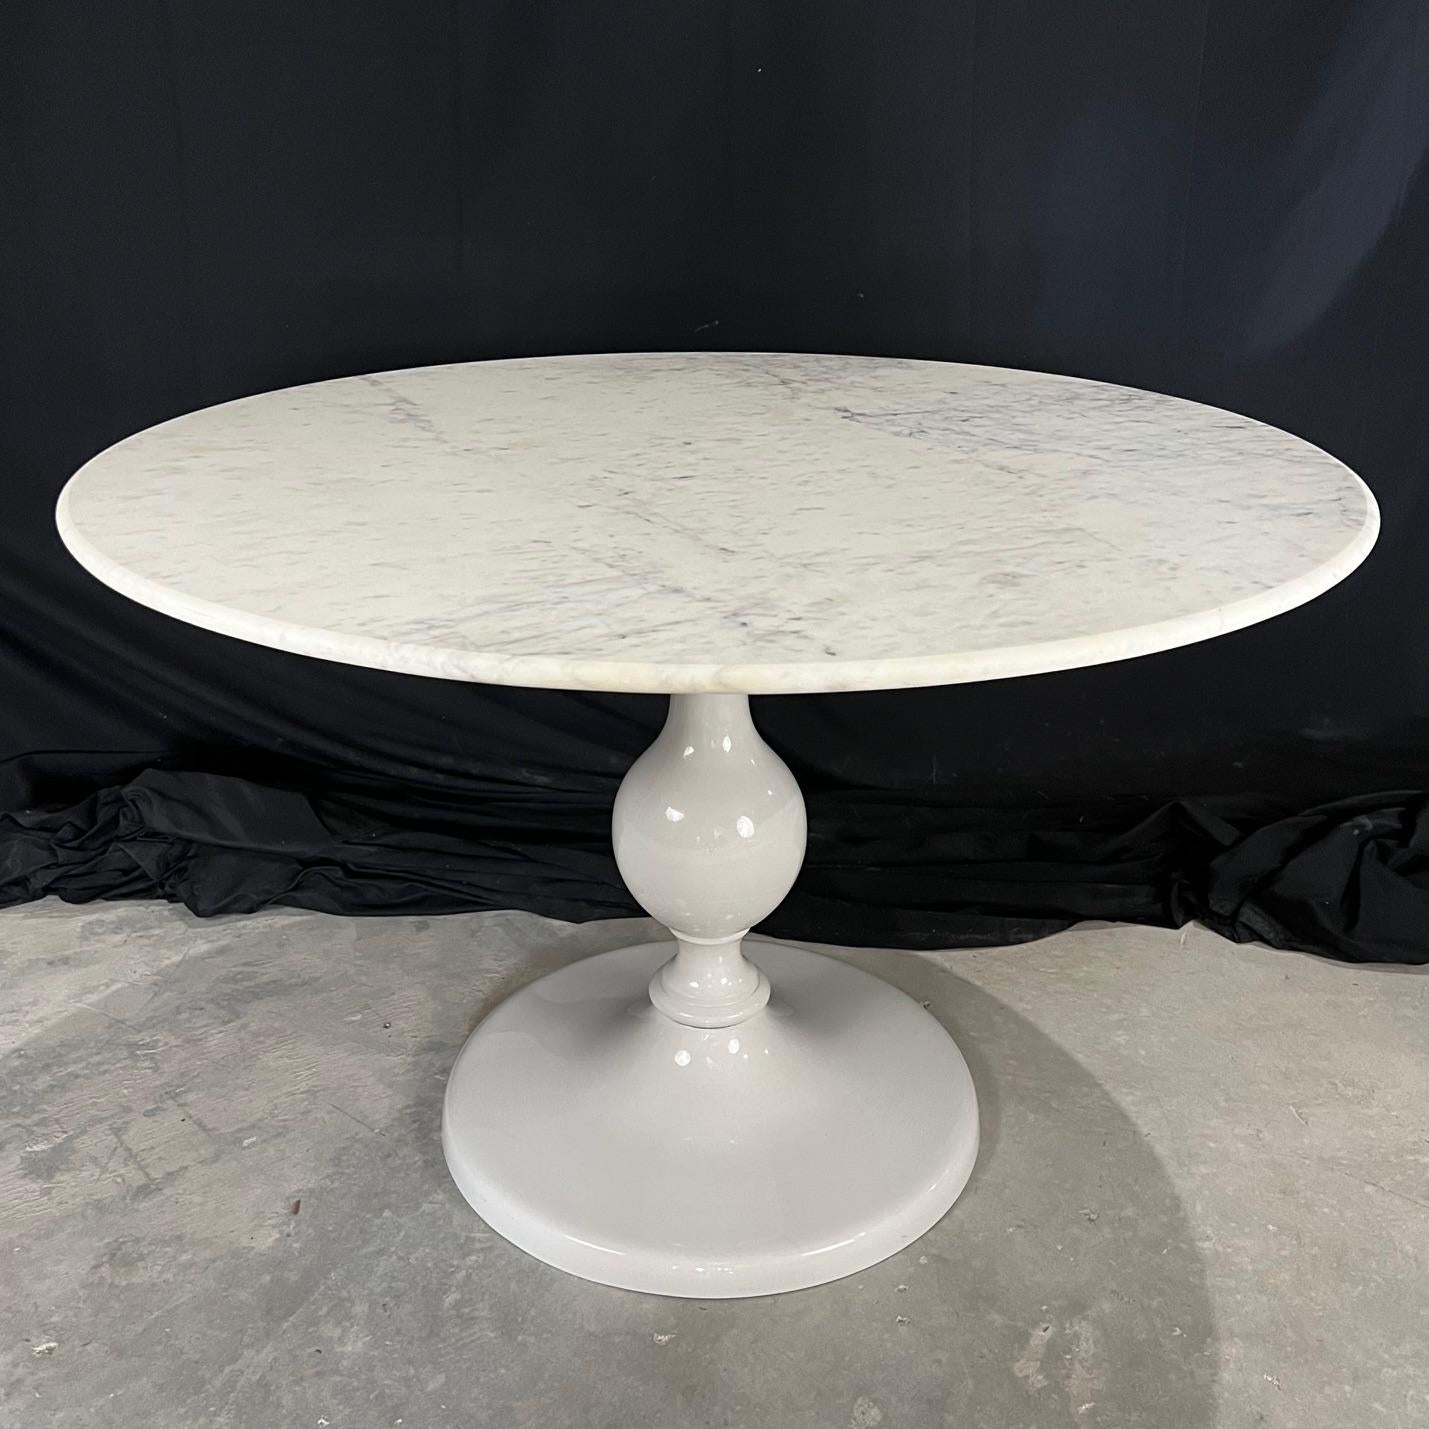  Italian Round Carrera Marble Top Dining Table For Sale 2